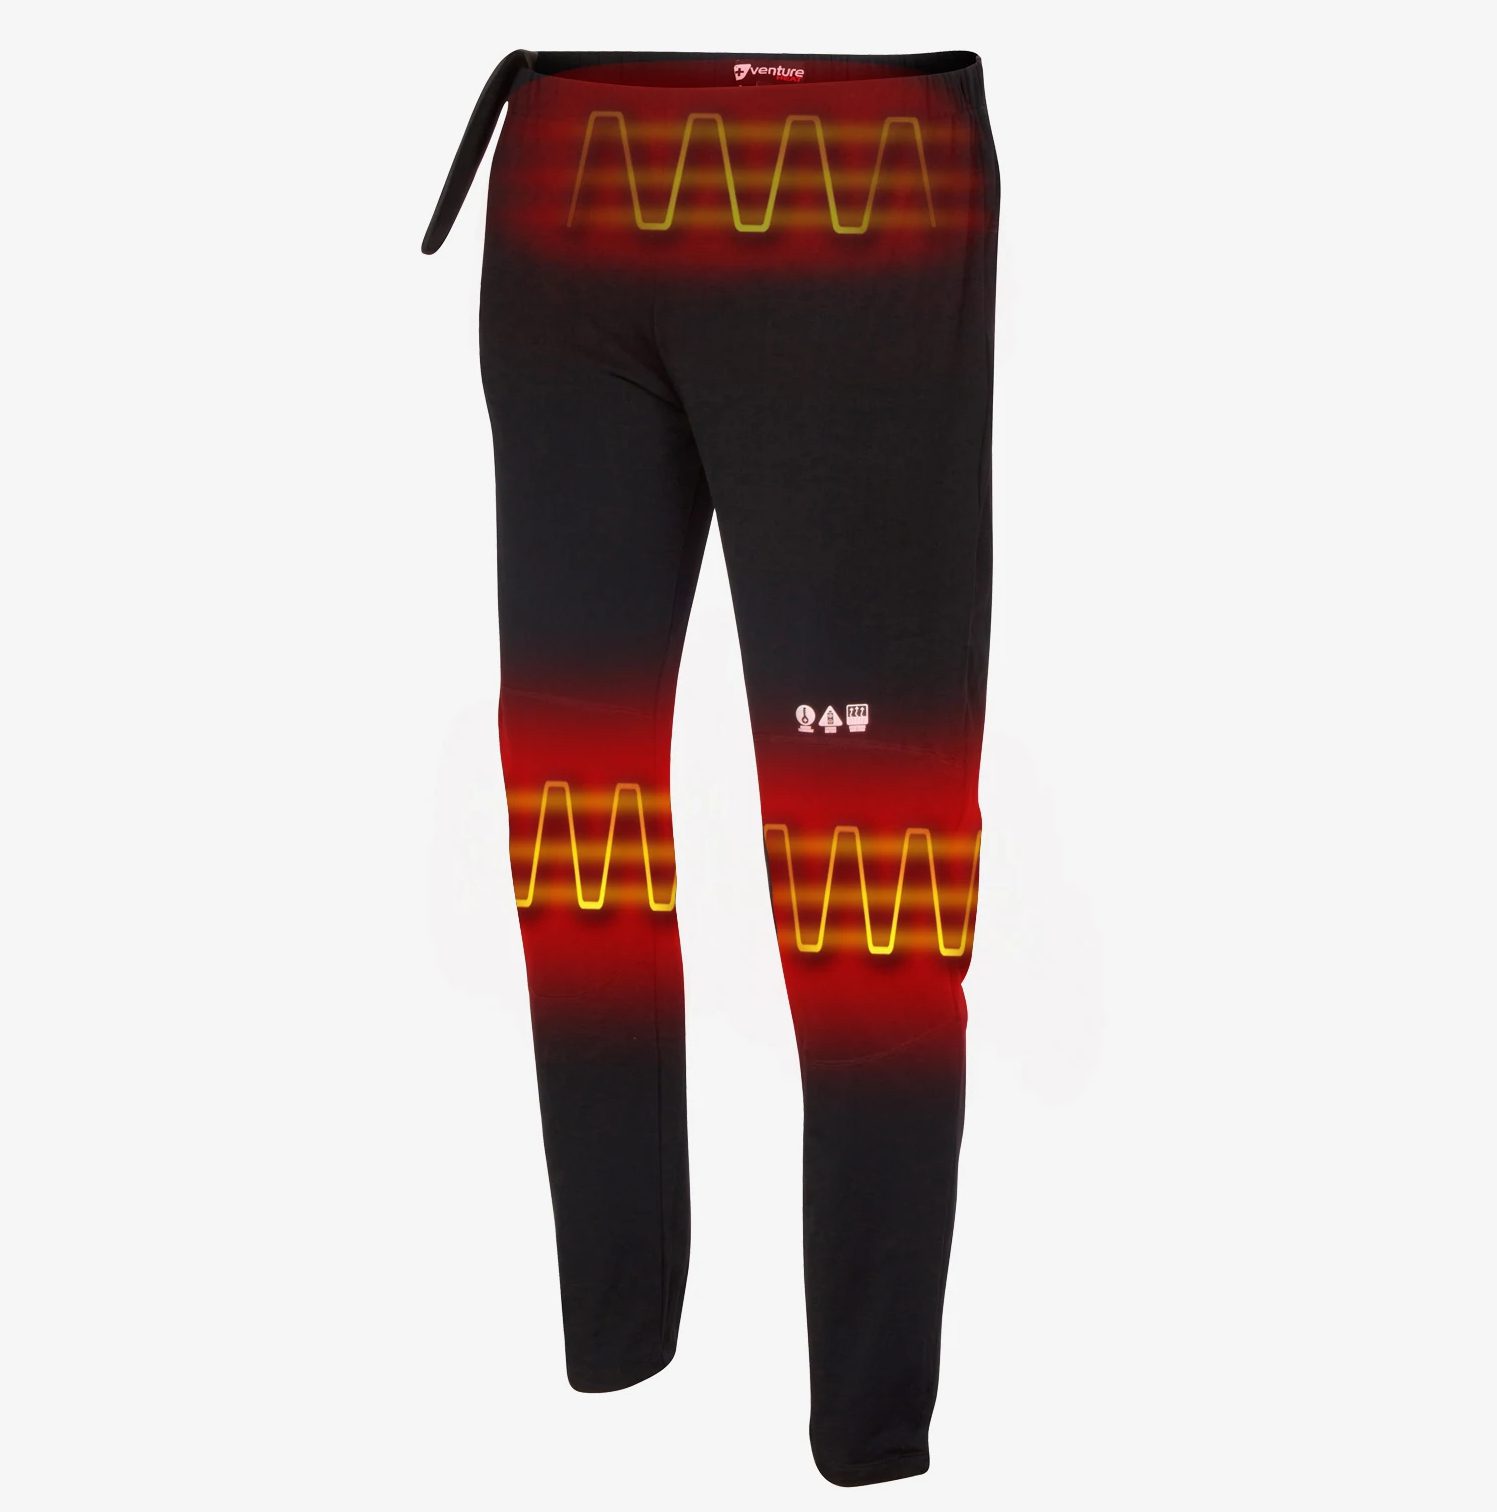 Unisex USB Battery Heated Quest Base Layer Pants- L Only